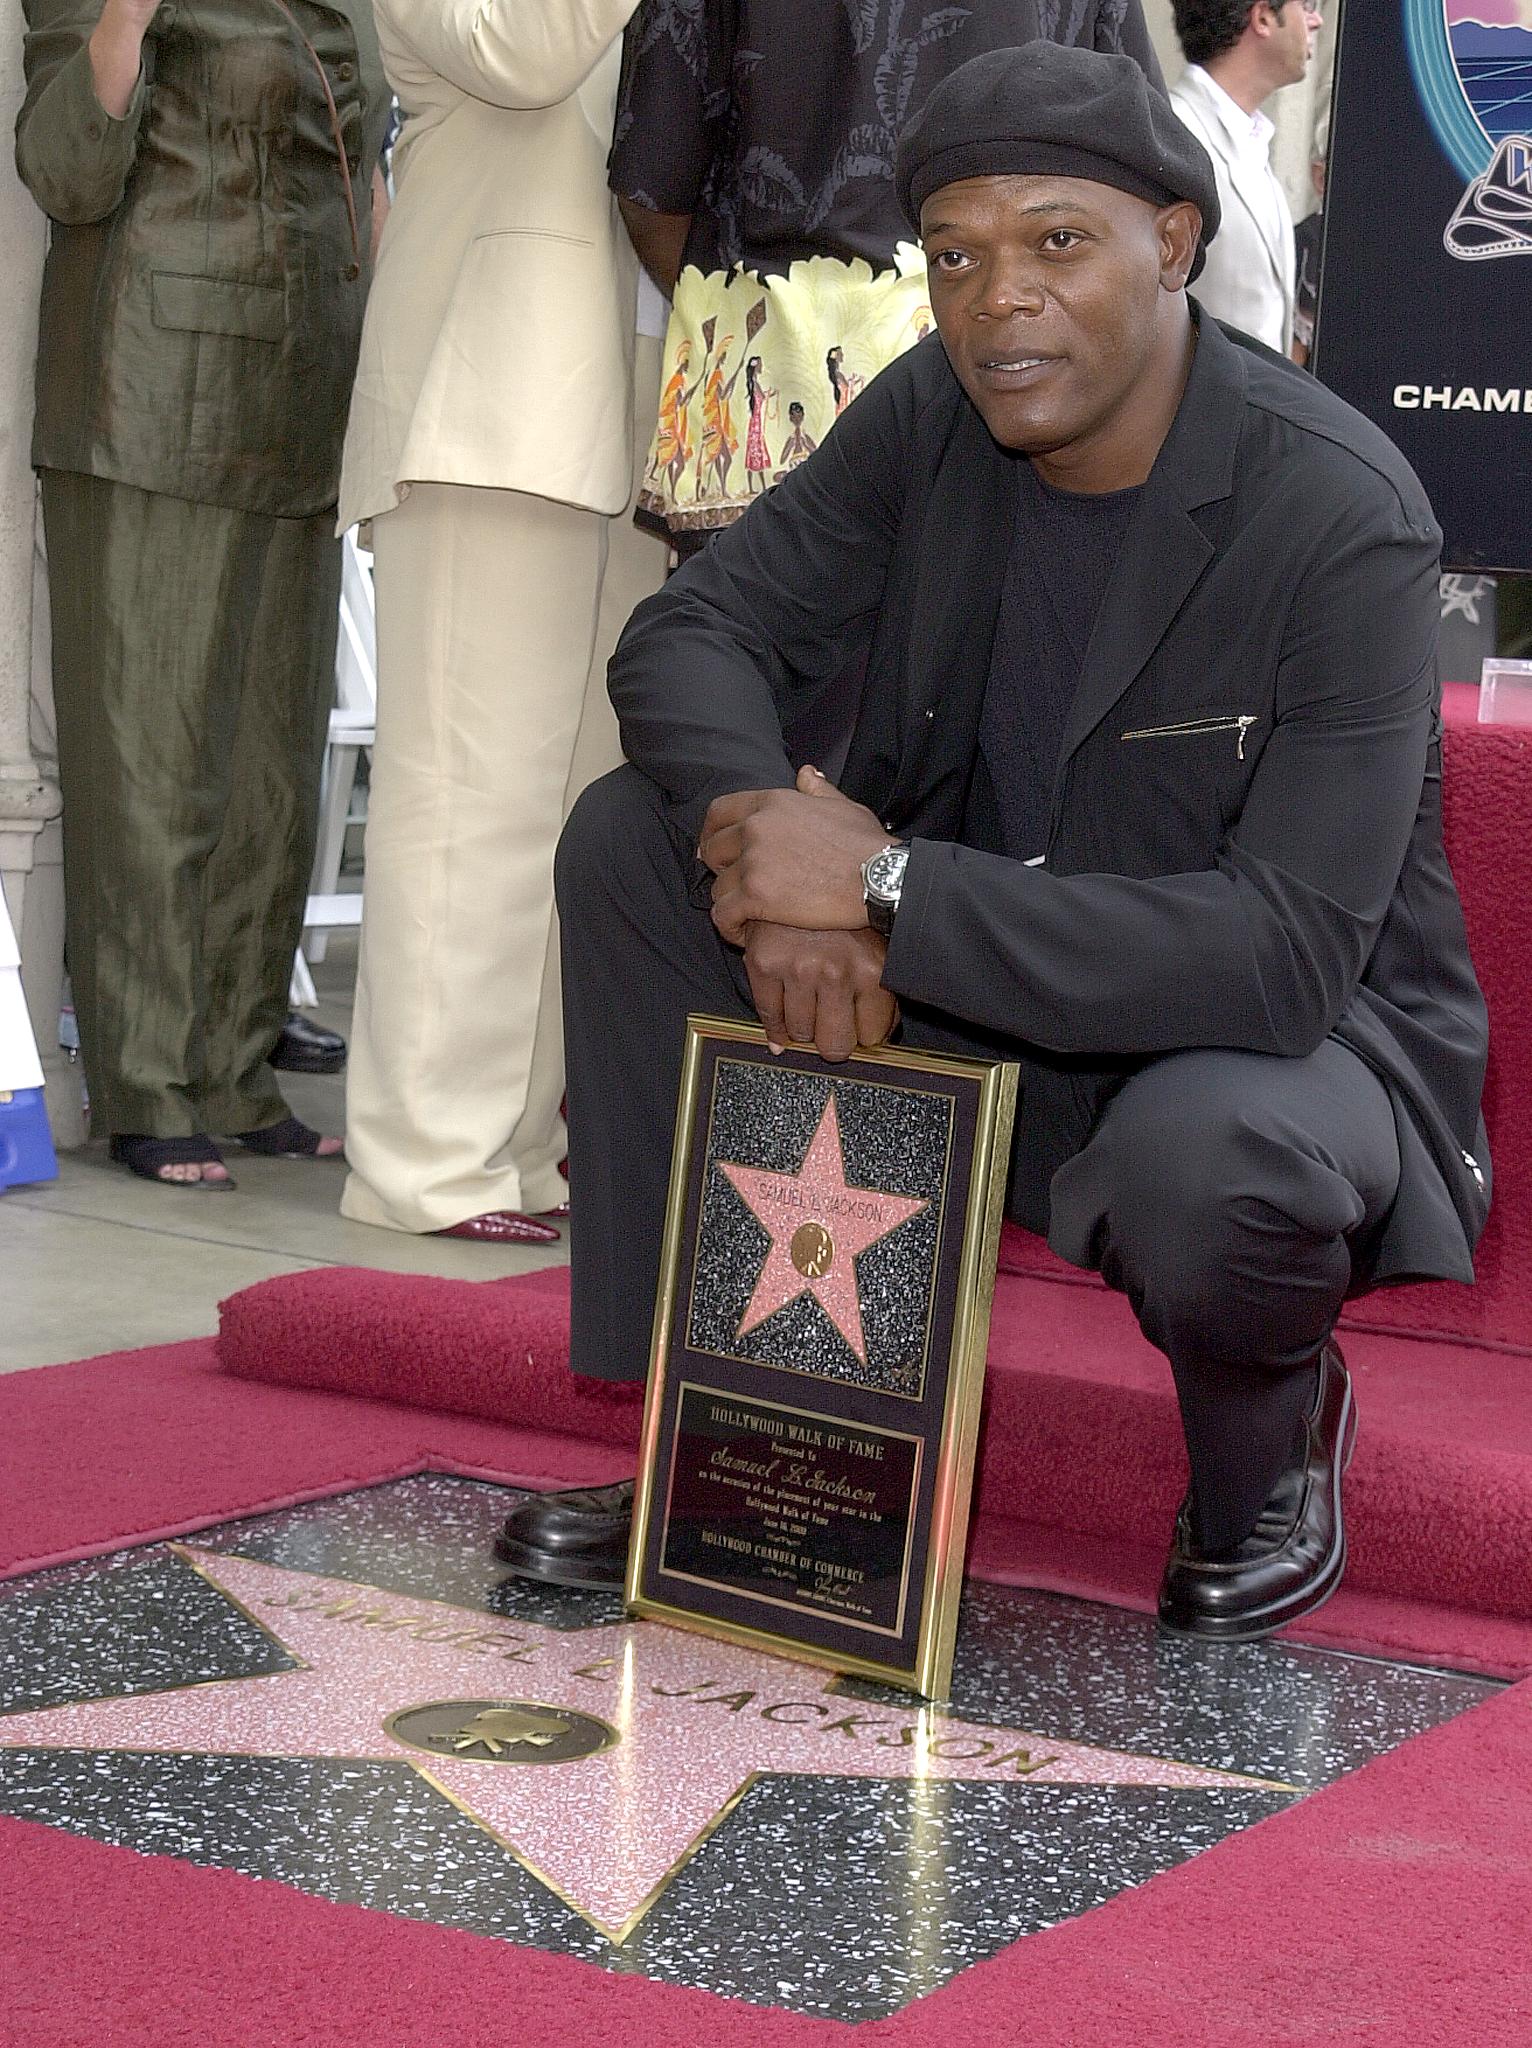 Samuel L. Jackson at the unveiling of his star on the Hollywood Walk of Fame June 16, 2000, in Los Angeles, CA. | Source: Getty Images.